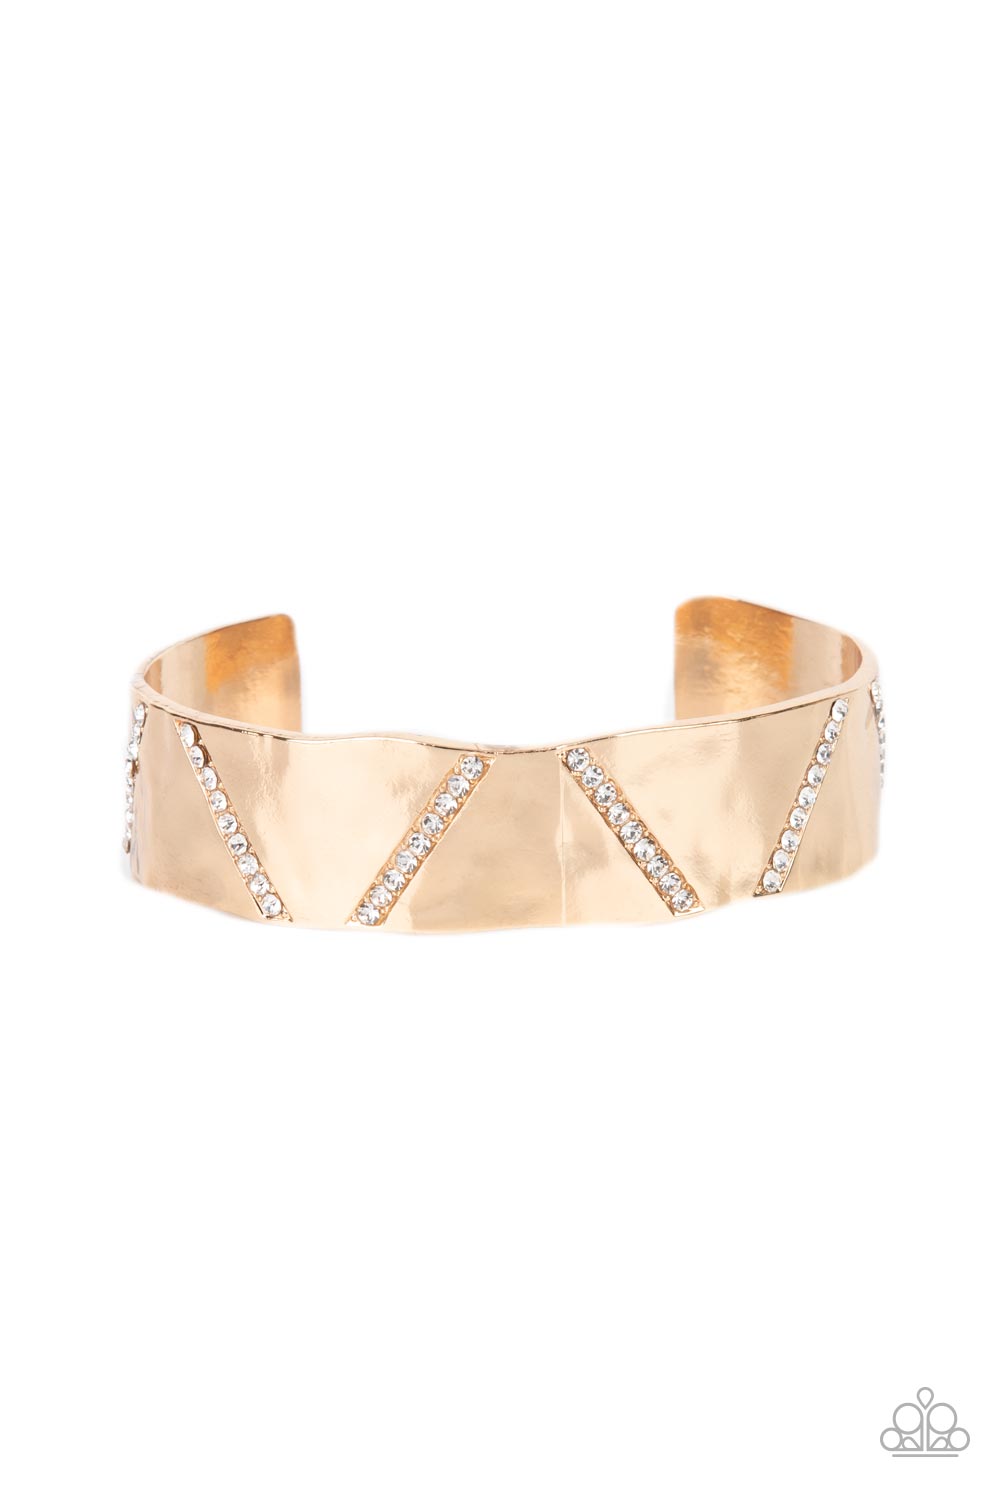 COUTURE CRUSHER GOLD-BRACELET